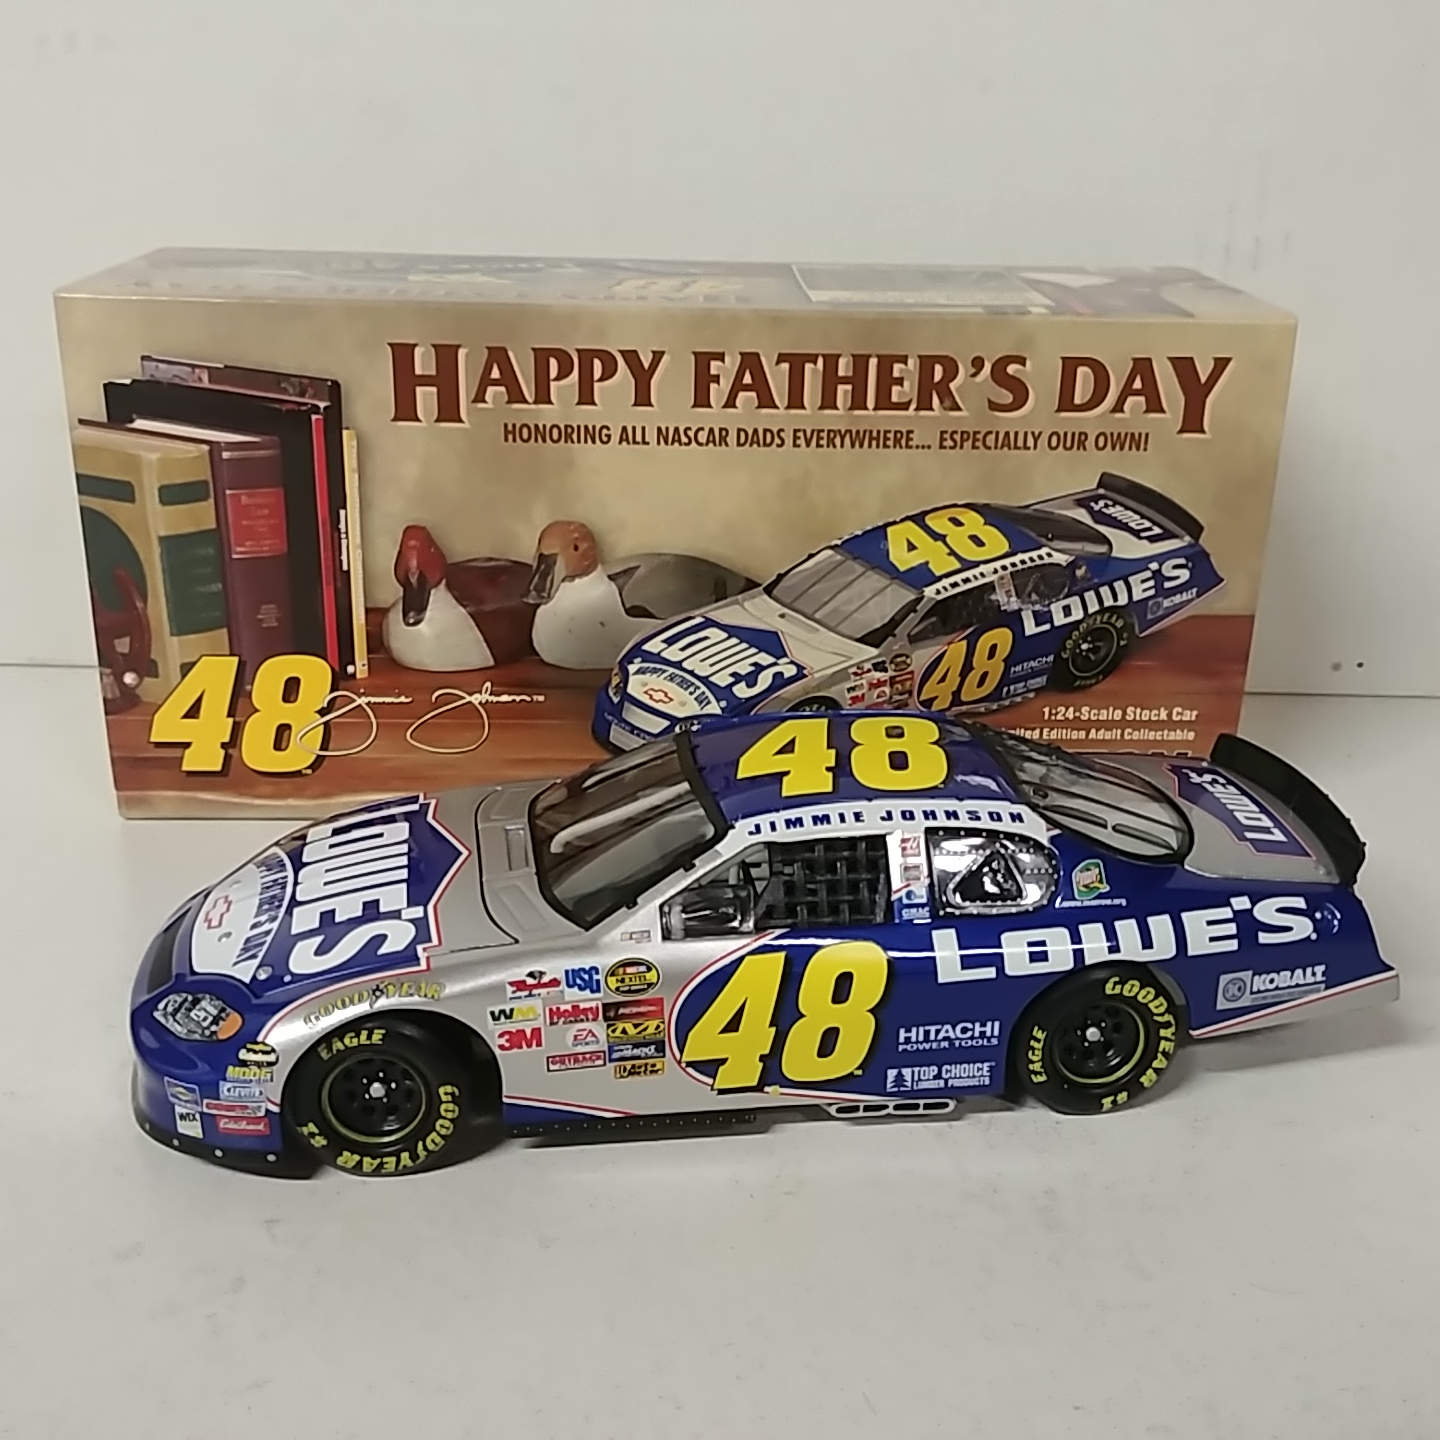 2004 Jimmy Johnson 1/24th Lowe's "Fathers Day" c/w car